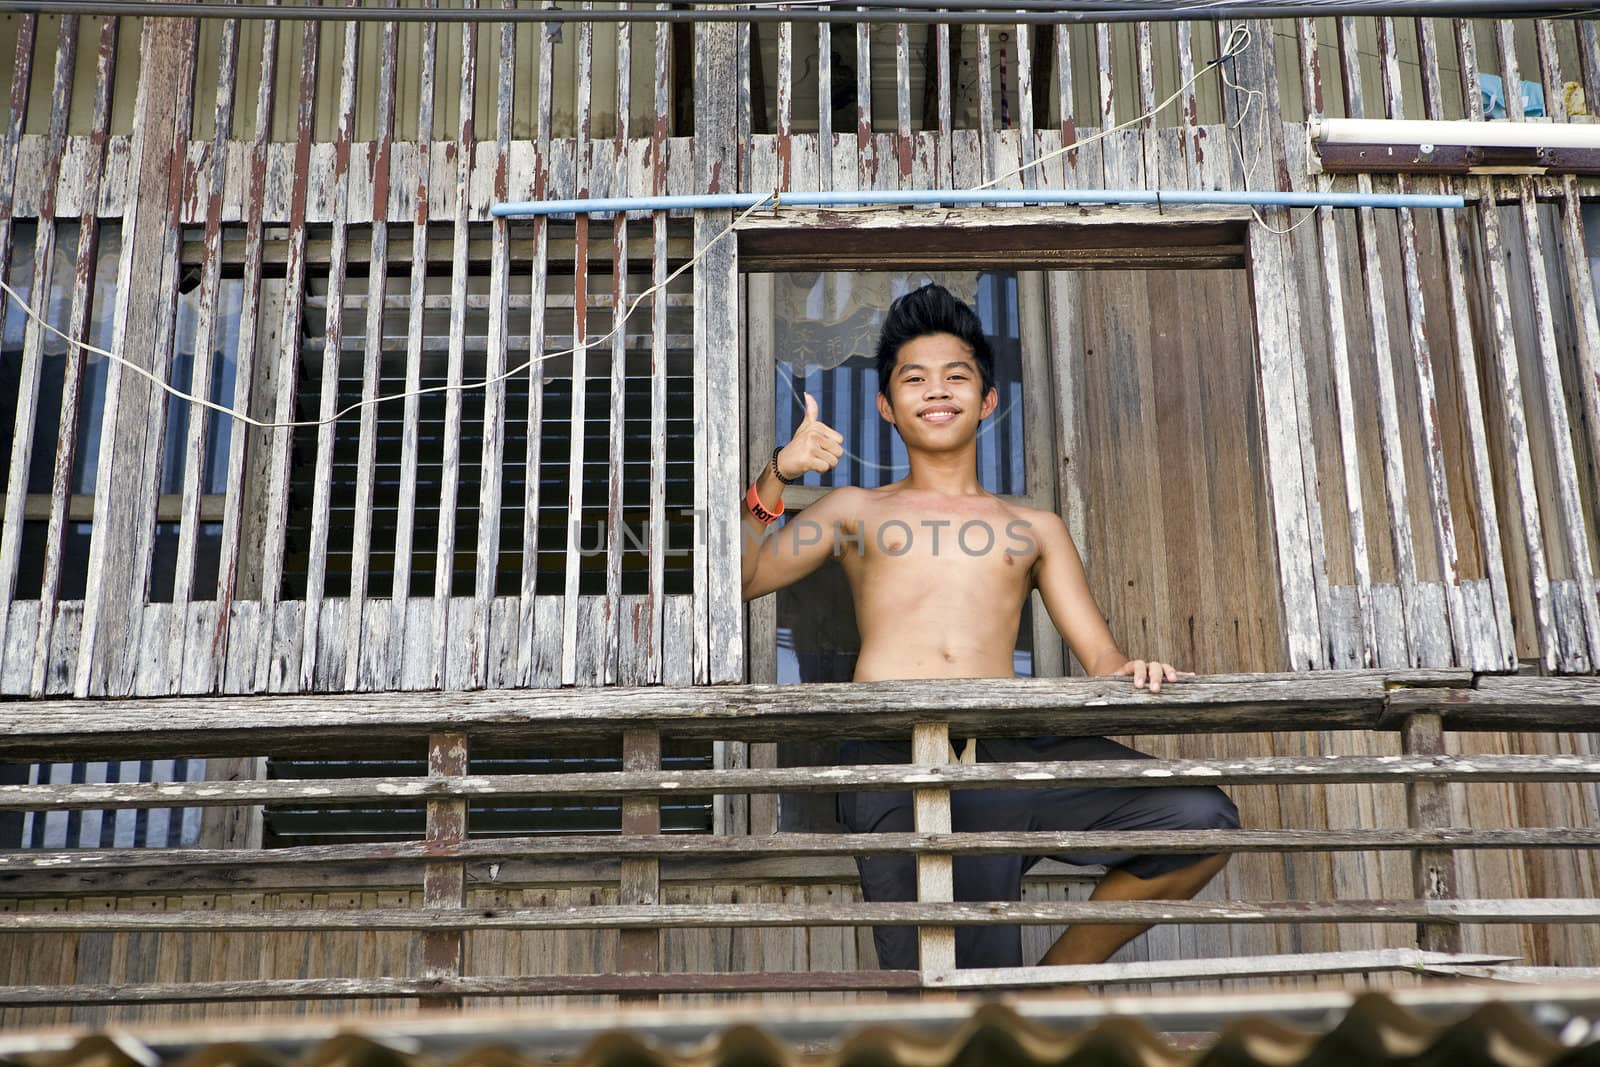 April 2012 - Bogo City, Panay, Philippine Islands - A smiling teenage Filipino boy giving thumbs up sign while standing on the porch of his traditional wooden style home in bogo City, Panay, Philippine Islands.